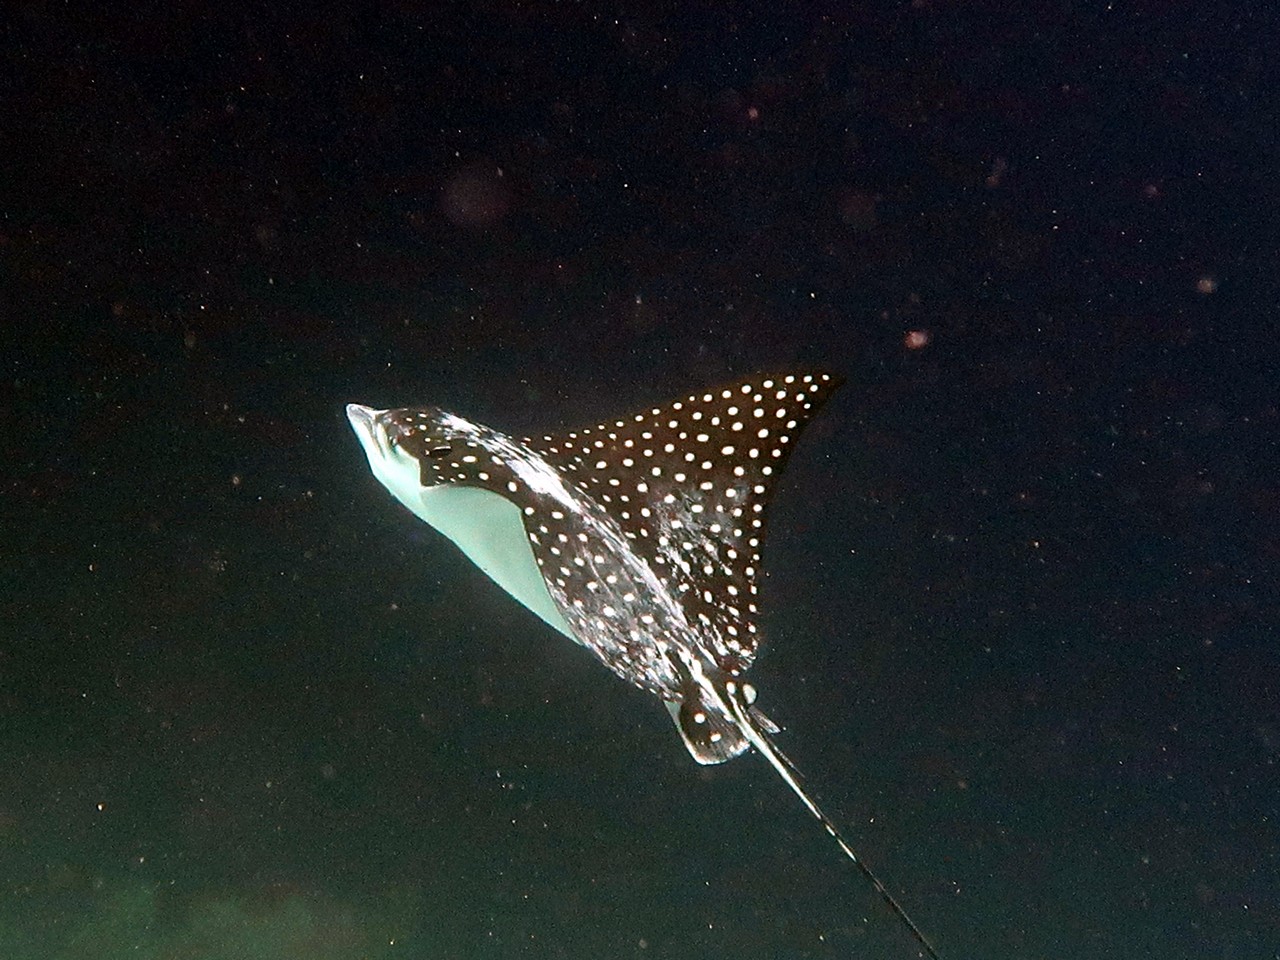 We finally see an Eagle Ray.